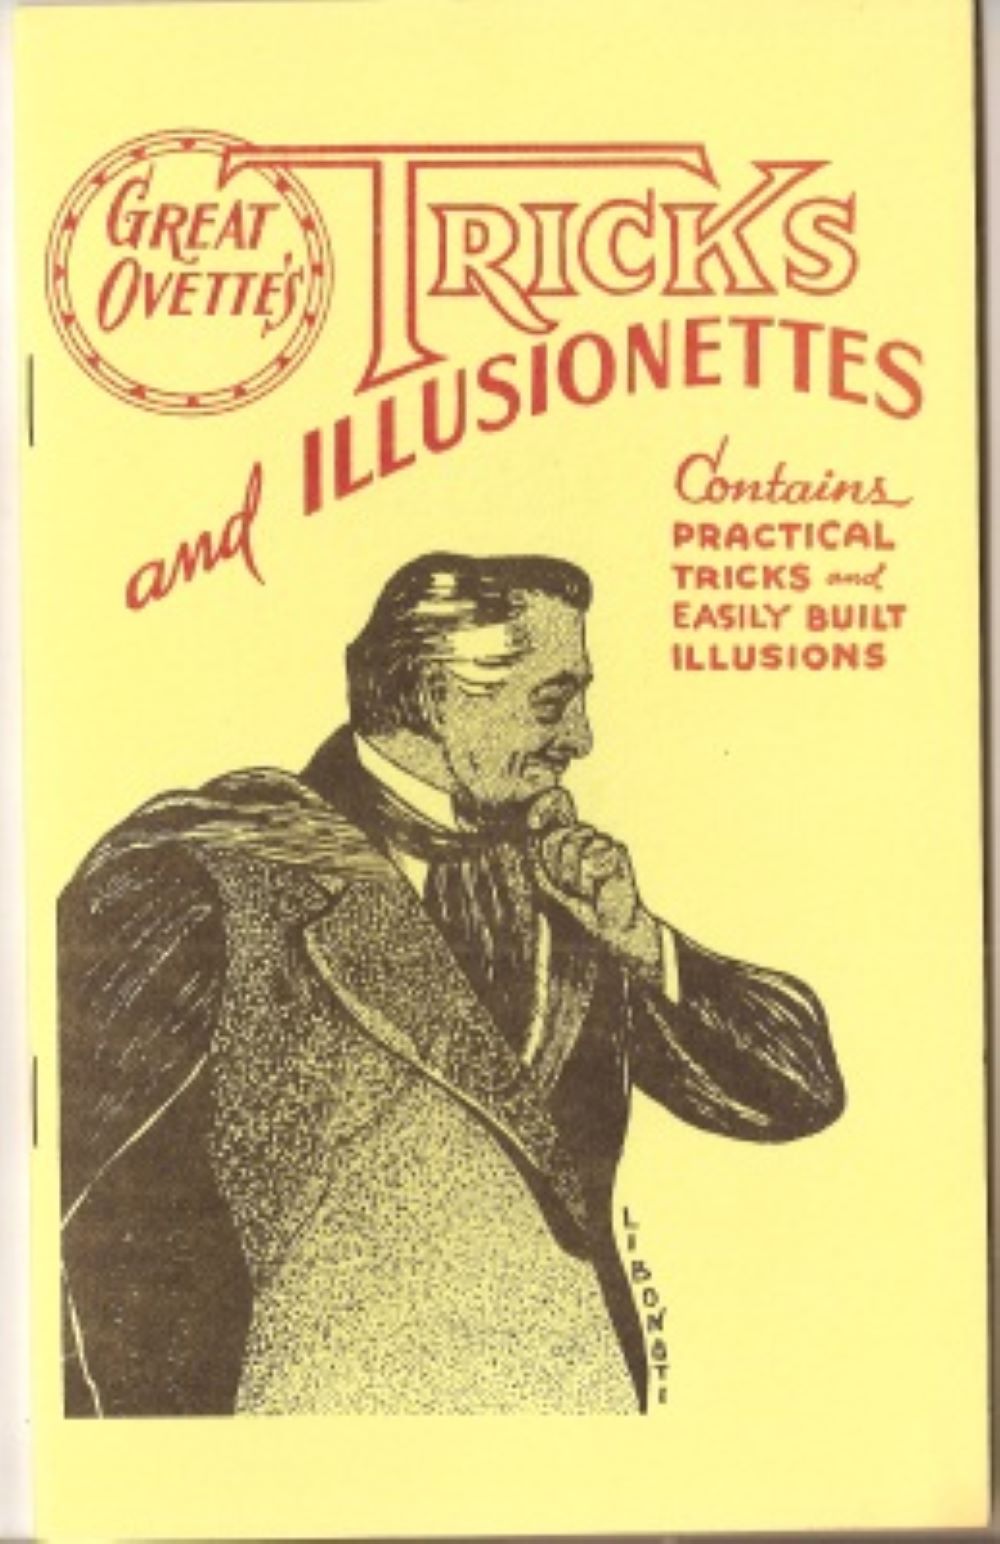 Tricks and Illusionettes by the Great Ovette - paperback book